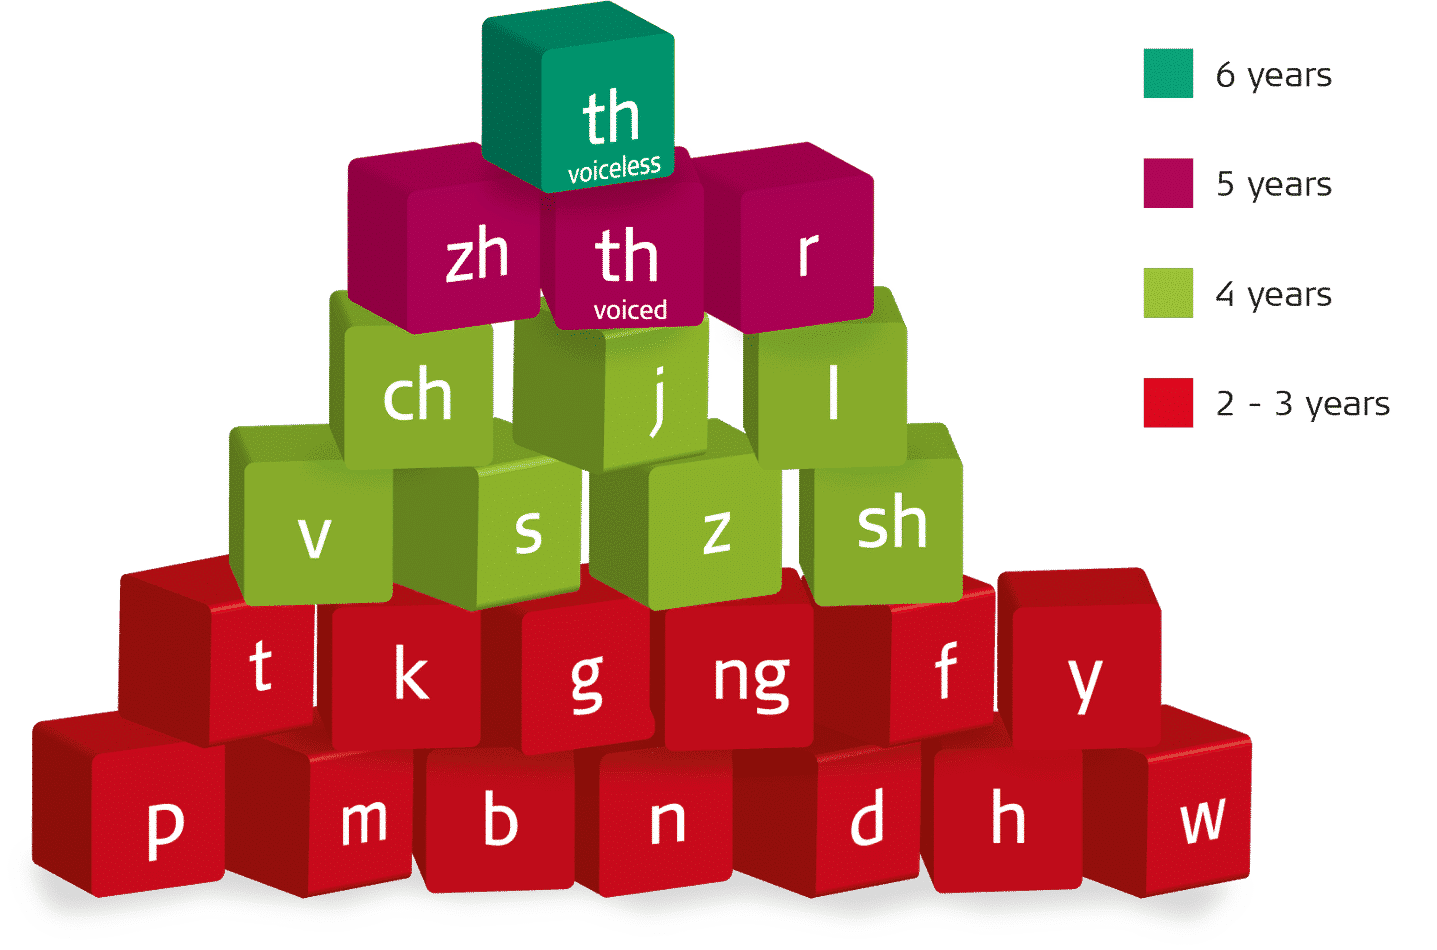 Acquisition of English consonants from birth to six years. The color of each block signifies the age when approximately 90% of typically developing children have acquired the sound shown. The building blocks of speech in English